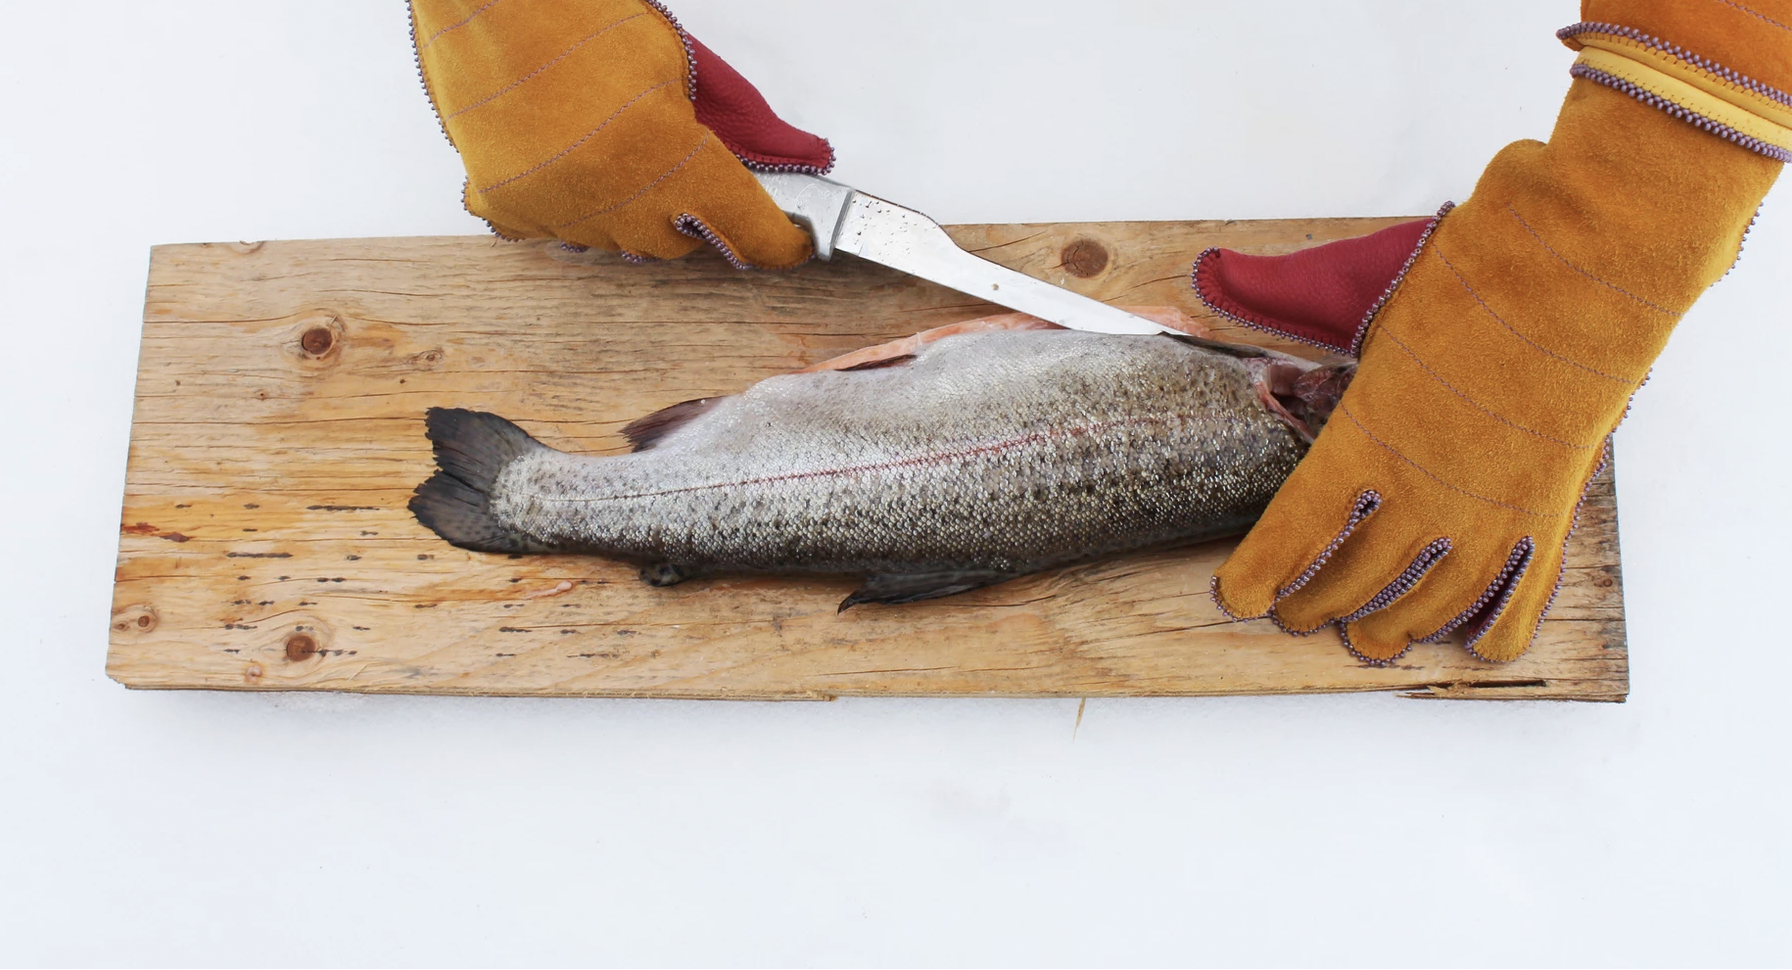 Photograph of yellow-gloved hands filleting a trout on a wooden cutting board.